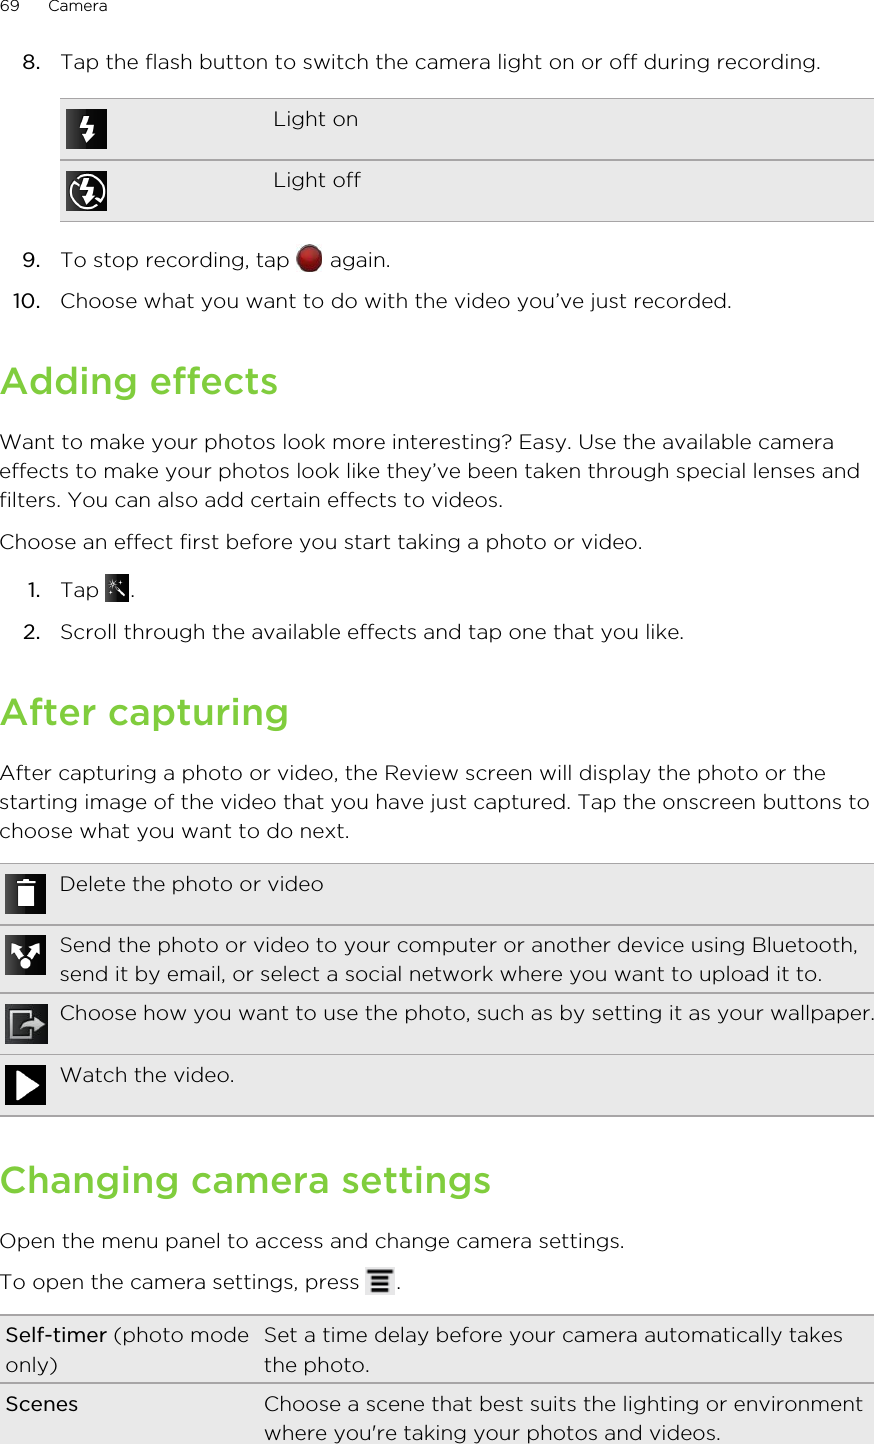 8. Tap the flash button to switch the camera light on or off during recording.Light onLight off9. To stop recording, tap   again.10. Choose what you want to do with the video you’ve just recorded.Adding effectsWant to make your photos look more interesting? Easy. Use the available cameraeffects to make your photos look like they’ve been taken through special lenses andfilters. You can also add certain effects to videos.Choose an effect first before you start taking a photo or video.1. Tap  .2. Scroll through the available effects and tap one that you like.After capturingAfter capturing a photo or video, the Review screen will display the photo or thestarting image of the video that you have just captured. Tap the onscreen buttons tochoose what you want to do next.Delete the photo or videoSend the photo or video to your computer or another device using Bluetooth,send it by email, or select a social network where you want to upload it to.Choose how you want to use the photo, such as by setting it as your wallpaper.Watch the video.Changing camera settingsOpen the menu panel to access and change camera settings.To open the camera settings, press  .Self-timer (photo modeonly)Set a time delay before your camera automatically takesthe photo.Scenes Choose a scene that best suits the lighting or environmentwhere you&apos;re taking your photos and videos.69 Camera